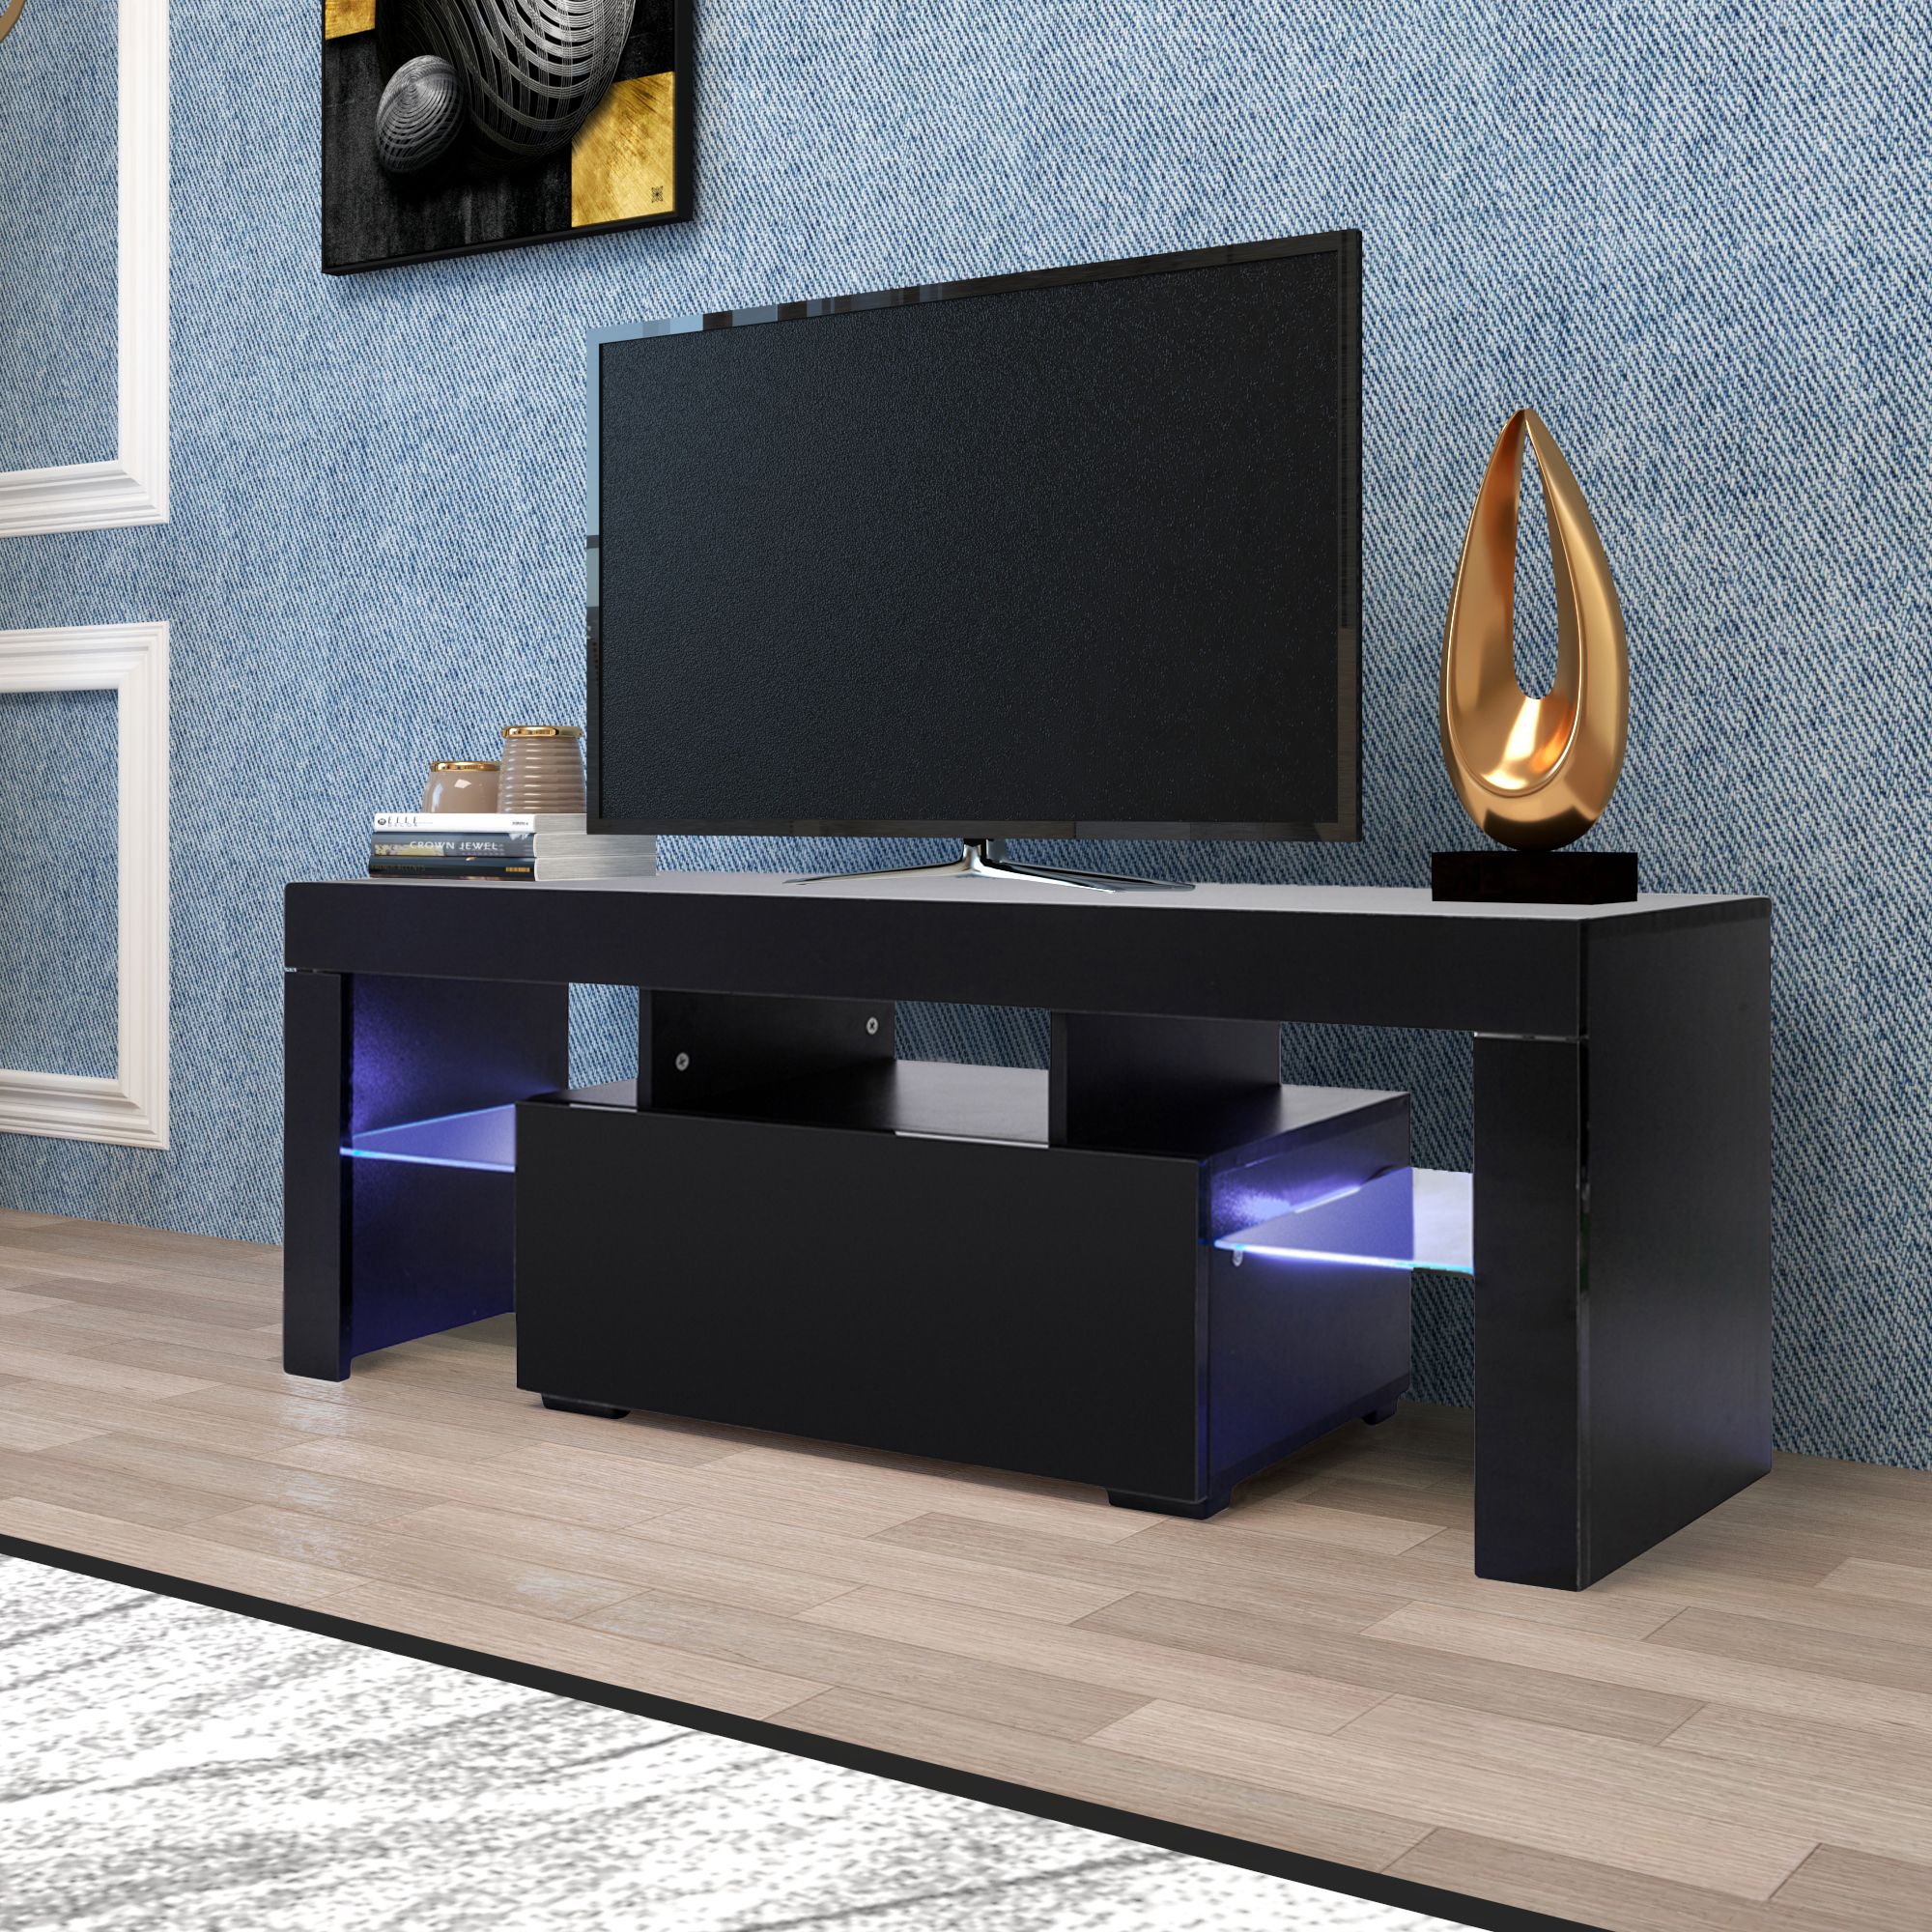 Entertainment Centers And Tv Stands, Yofe Tv Stand With Regarding Led Tv Stands (View 4 of 15)